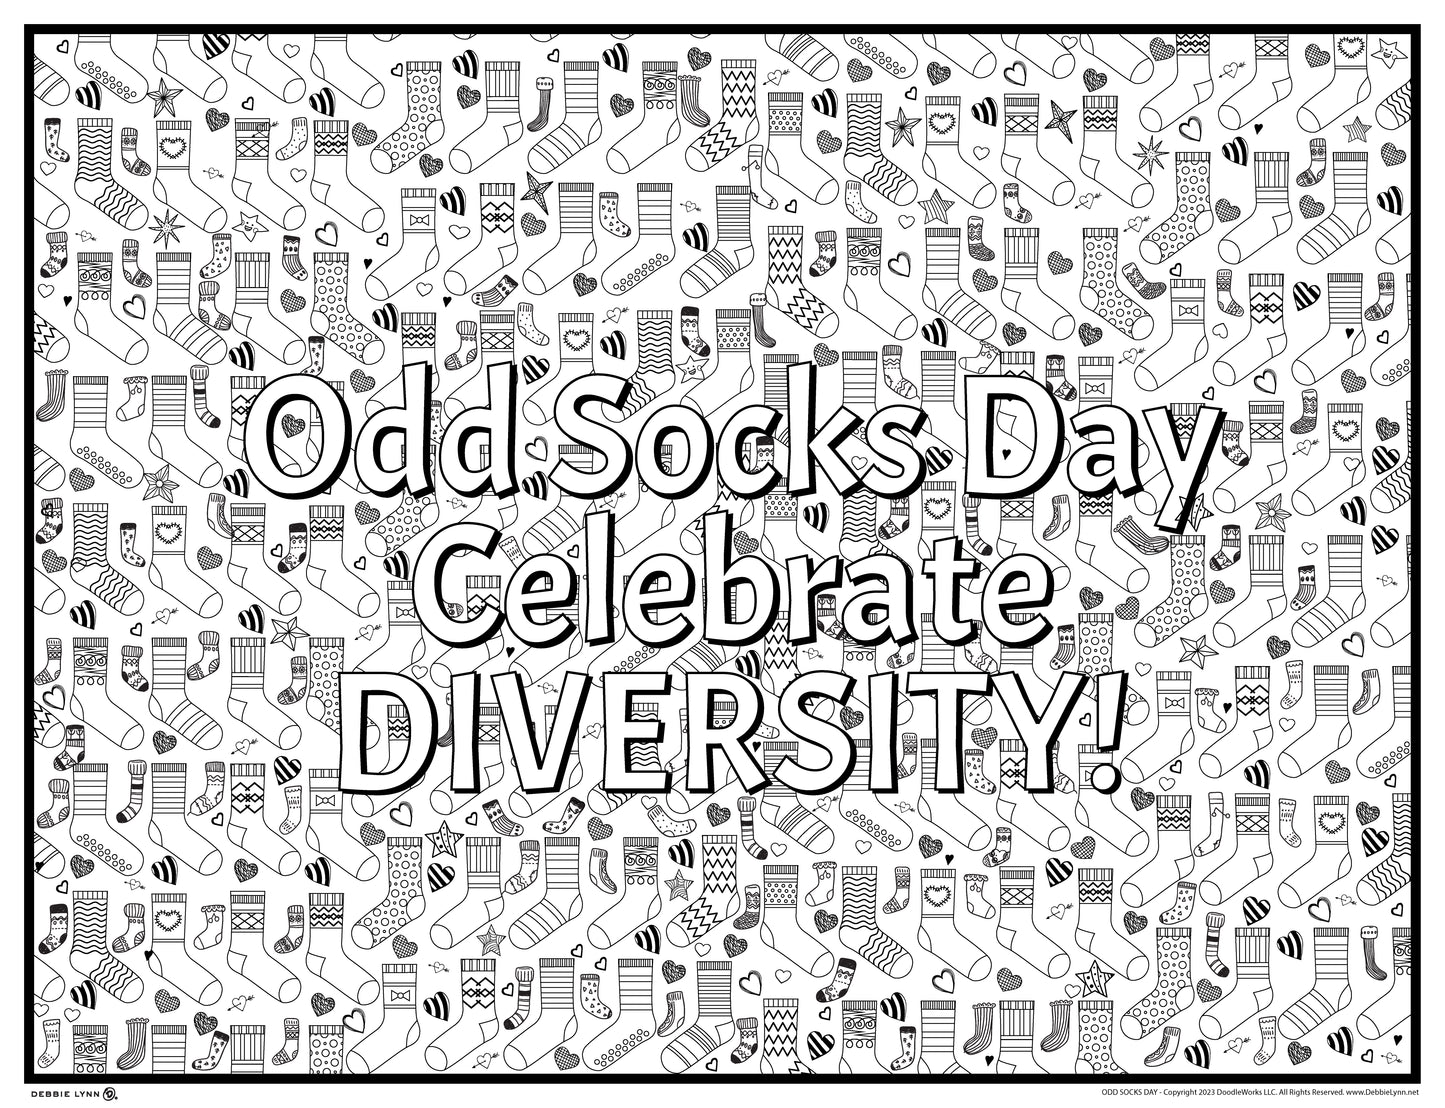 Odd Socks Day Diversity Personalized Giant Coloring Poster 46x60"